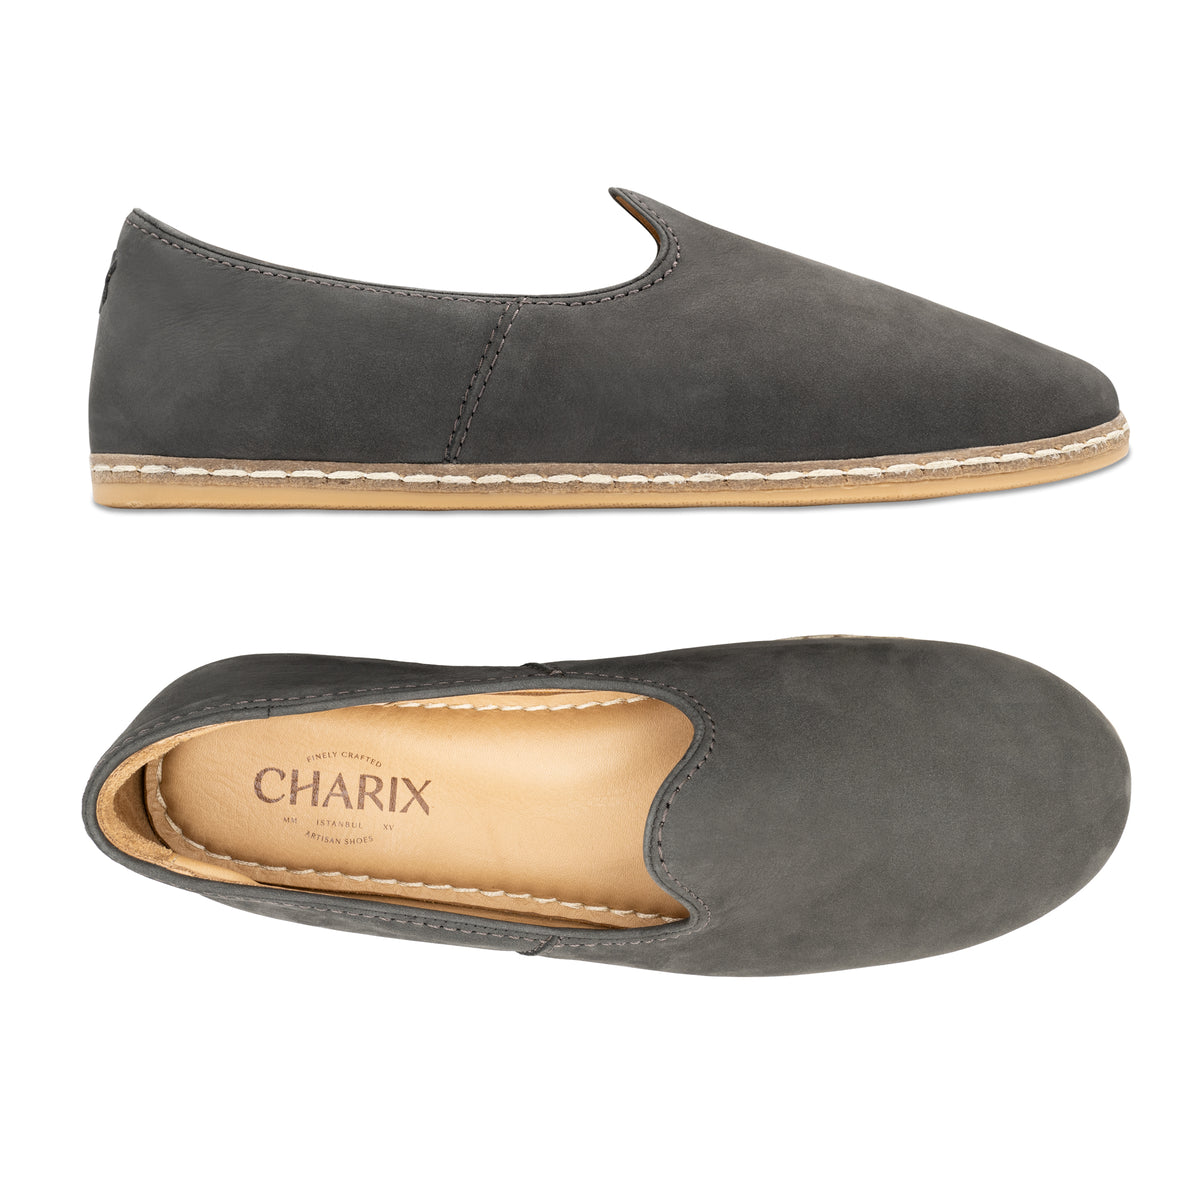 Graphite Suede Slip On Shoes